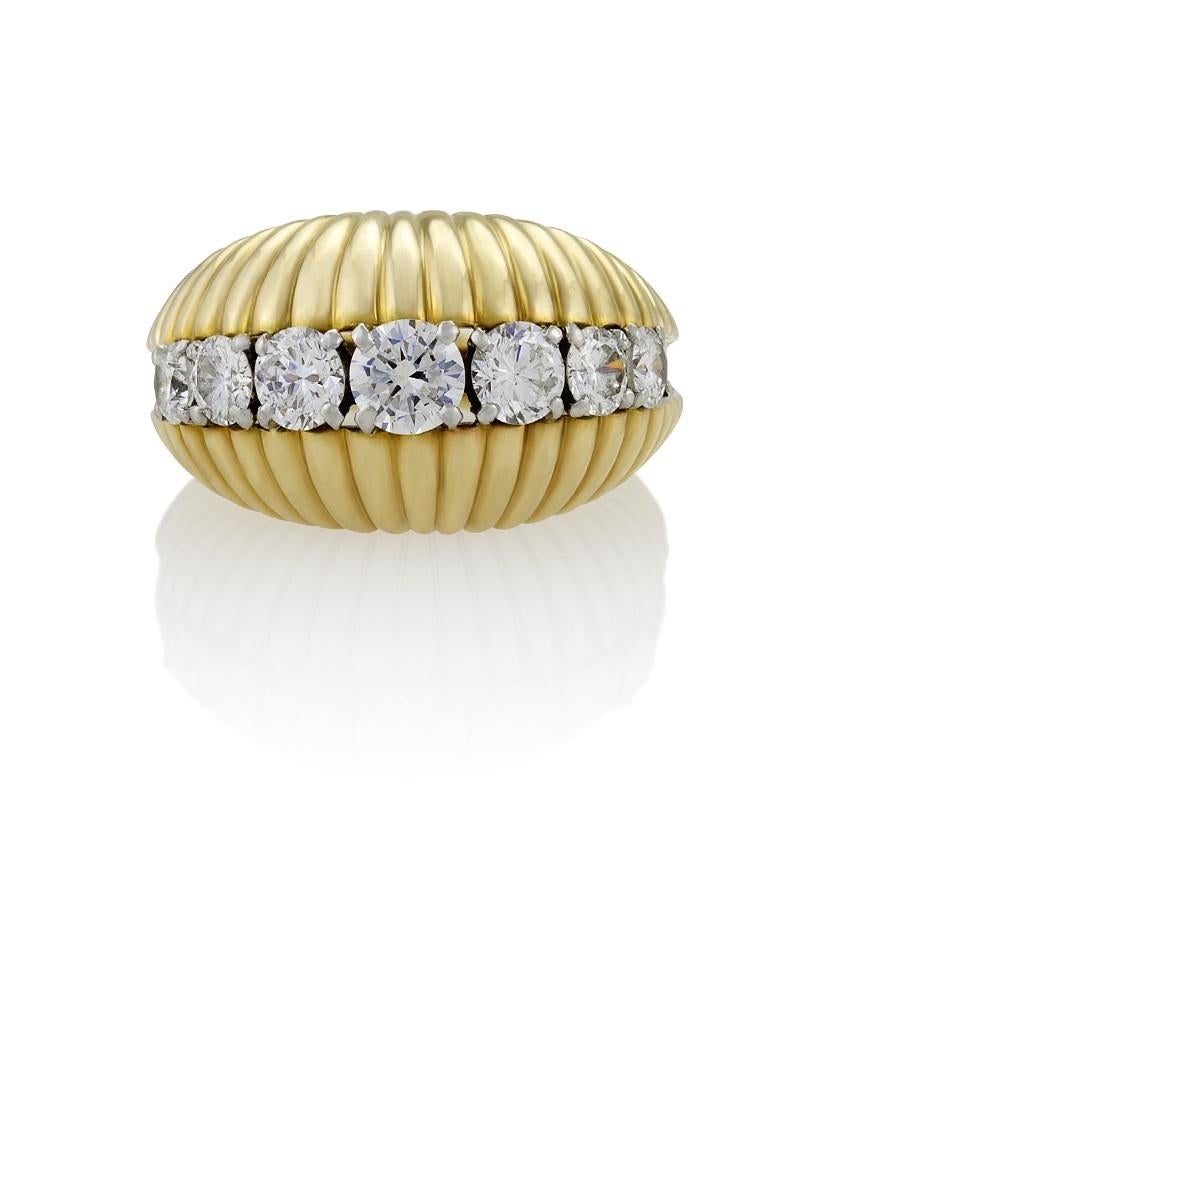 A Mid-20th century 18 karat gold and platinum ring with diamonds by Van Cleef & Arpels. The scalloped  bombé ring has 7 round-cut diamonds with an approximate total weight of 1.25 carats, G/H color, VS clarity. Circa 1960's.

Signed, “Van Cleef &